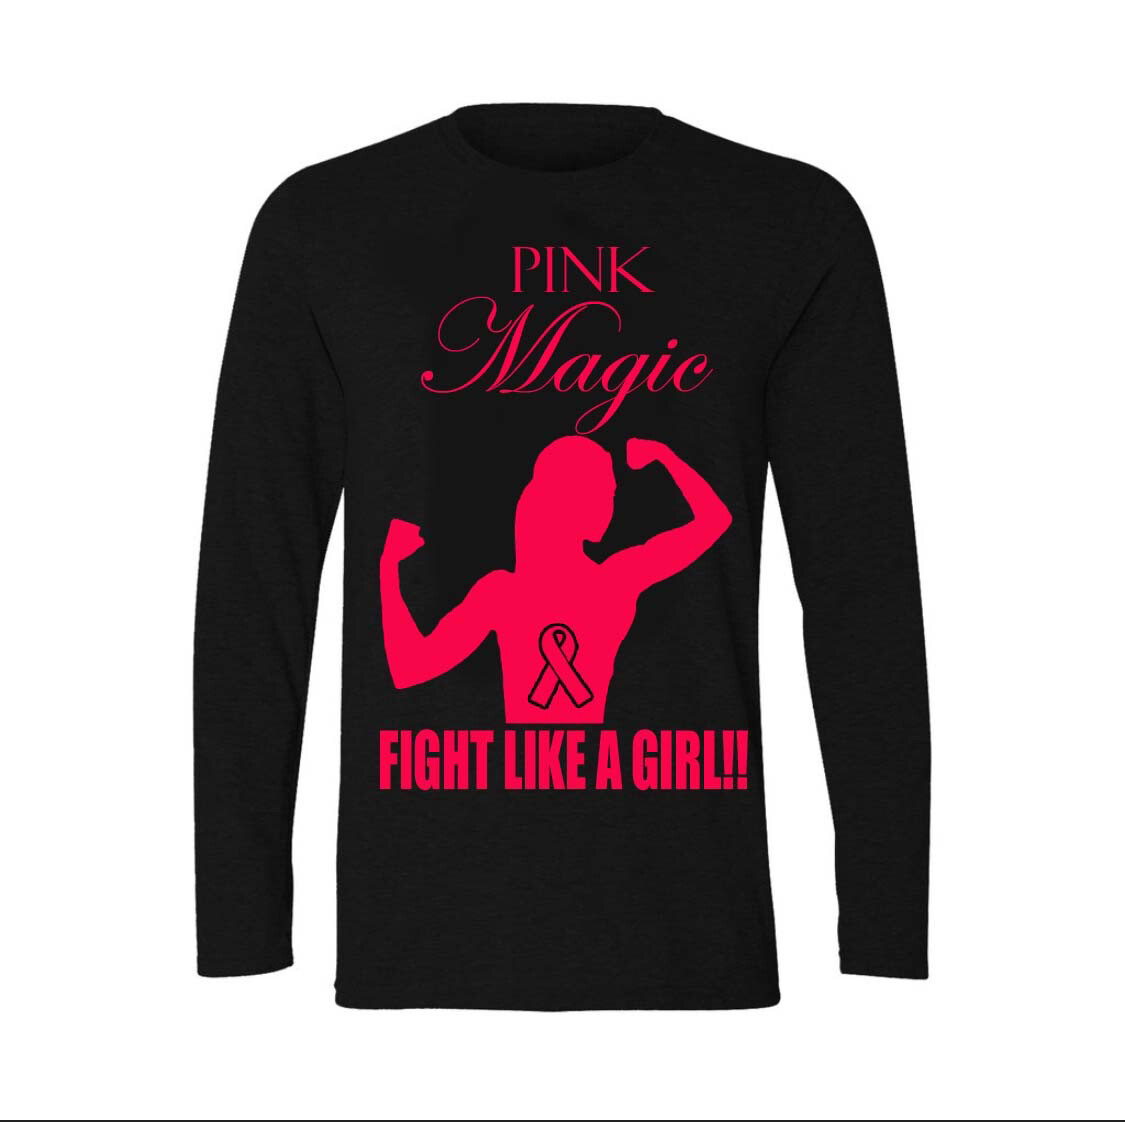 “Pink” Magic (Breast Cancer Edition) 2